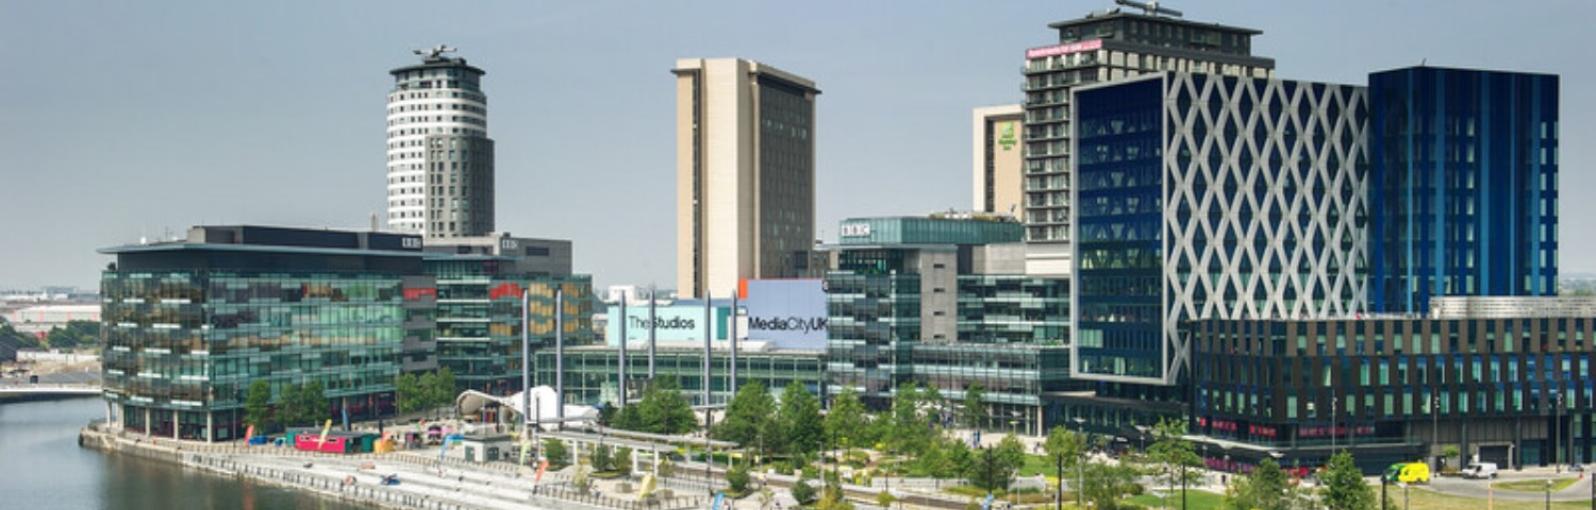 An aerial view of MediaCity